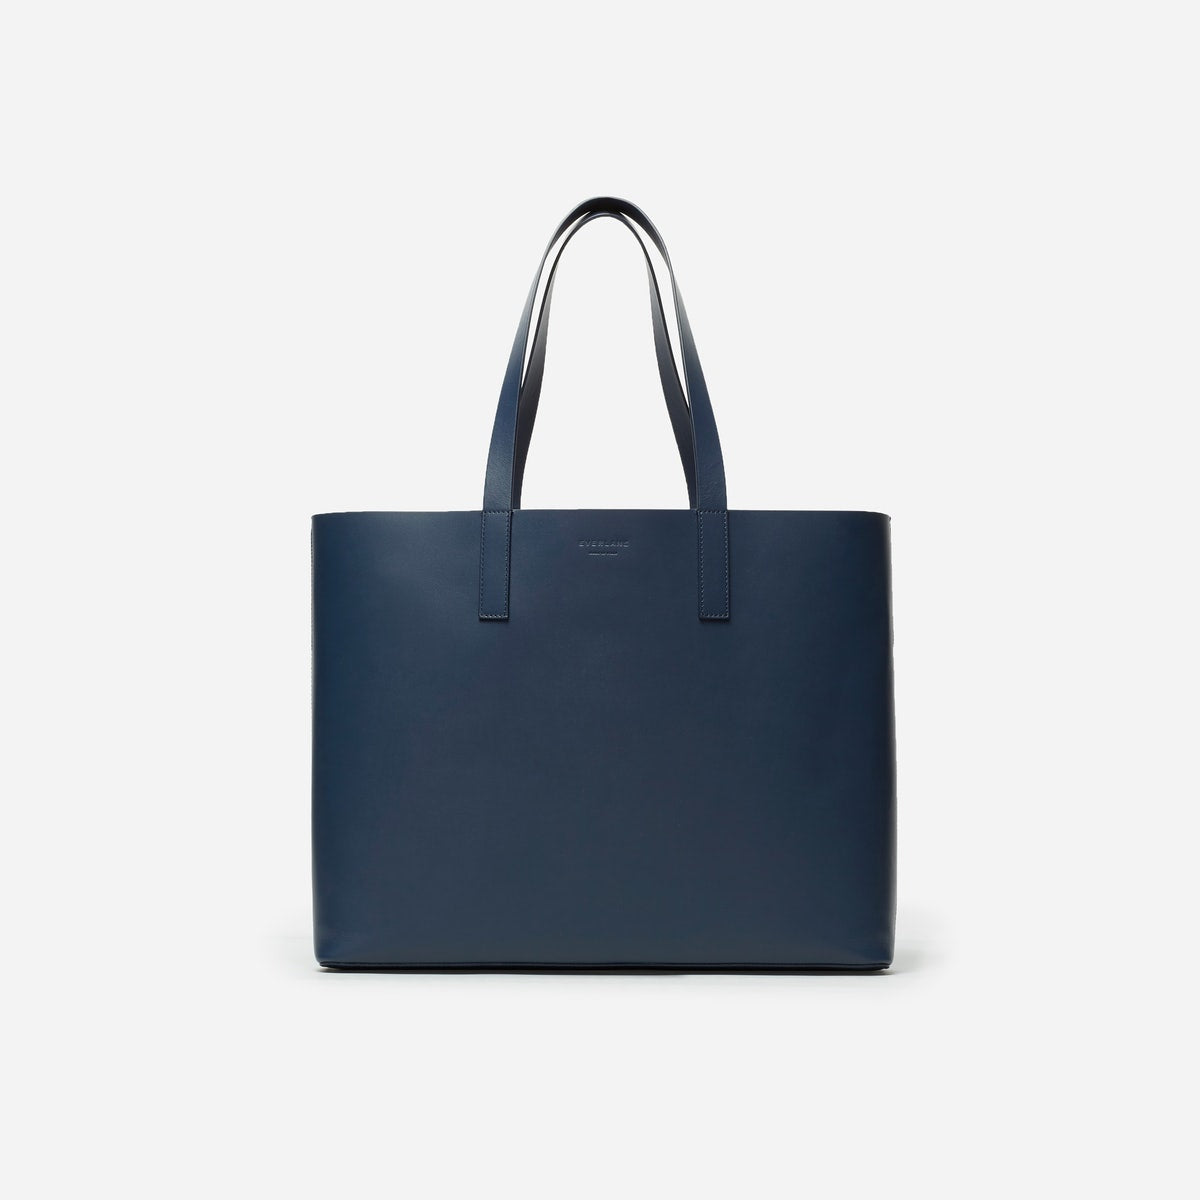 Everlane Everyday Leather Tote in Petra